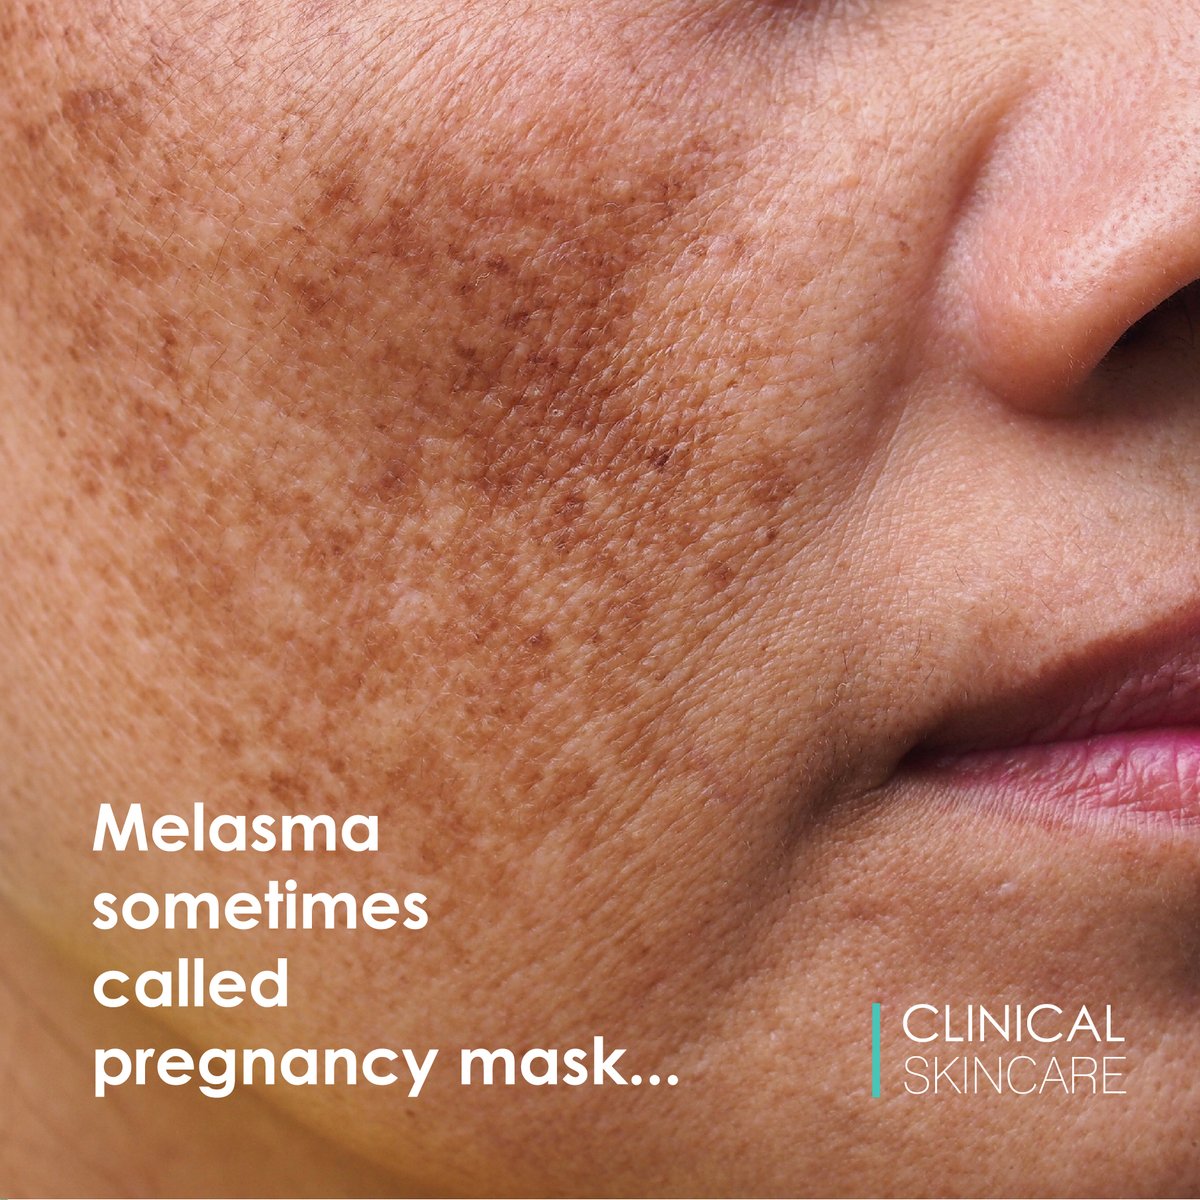 Melasna can be caused by sun exposure, hormonal treatments (contraceptive pills), certain medications, pregnancy and hypothyroidism (under active thyroid gland)
Book a free consultation to see how we can help you. 
clinicalskincare.co.uk
#melasma #melasmatreatment #skincare